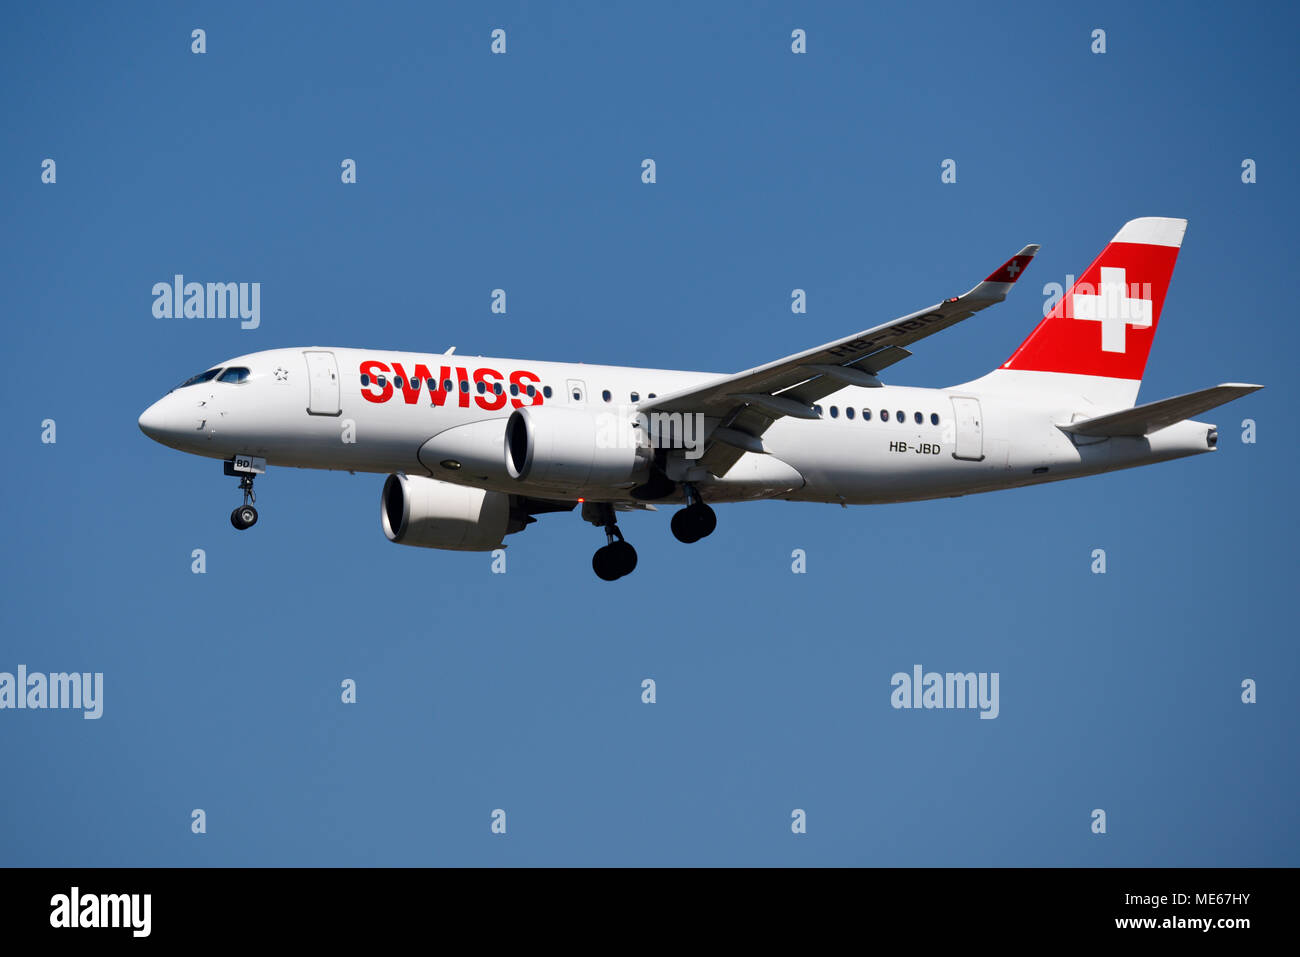 Swiss airline Bombardier CSeries CS100 jet plane coming in to land at London Heathrow Airport, UK, in blue sky. C Series HB-JBD Stock Photo